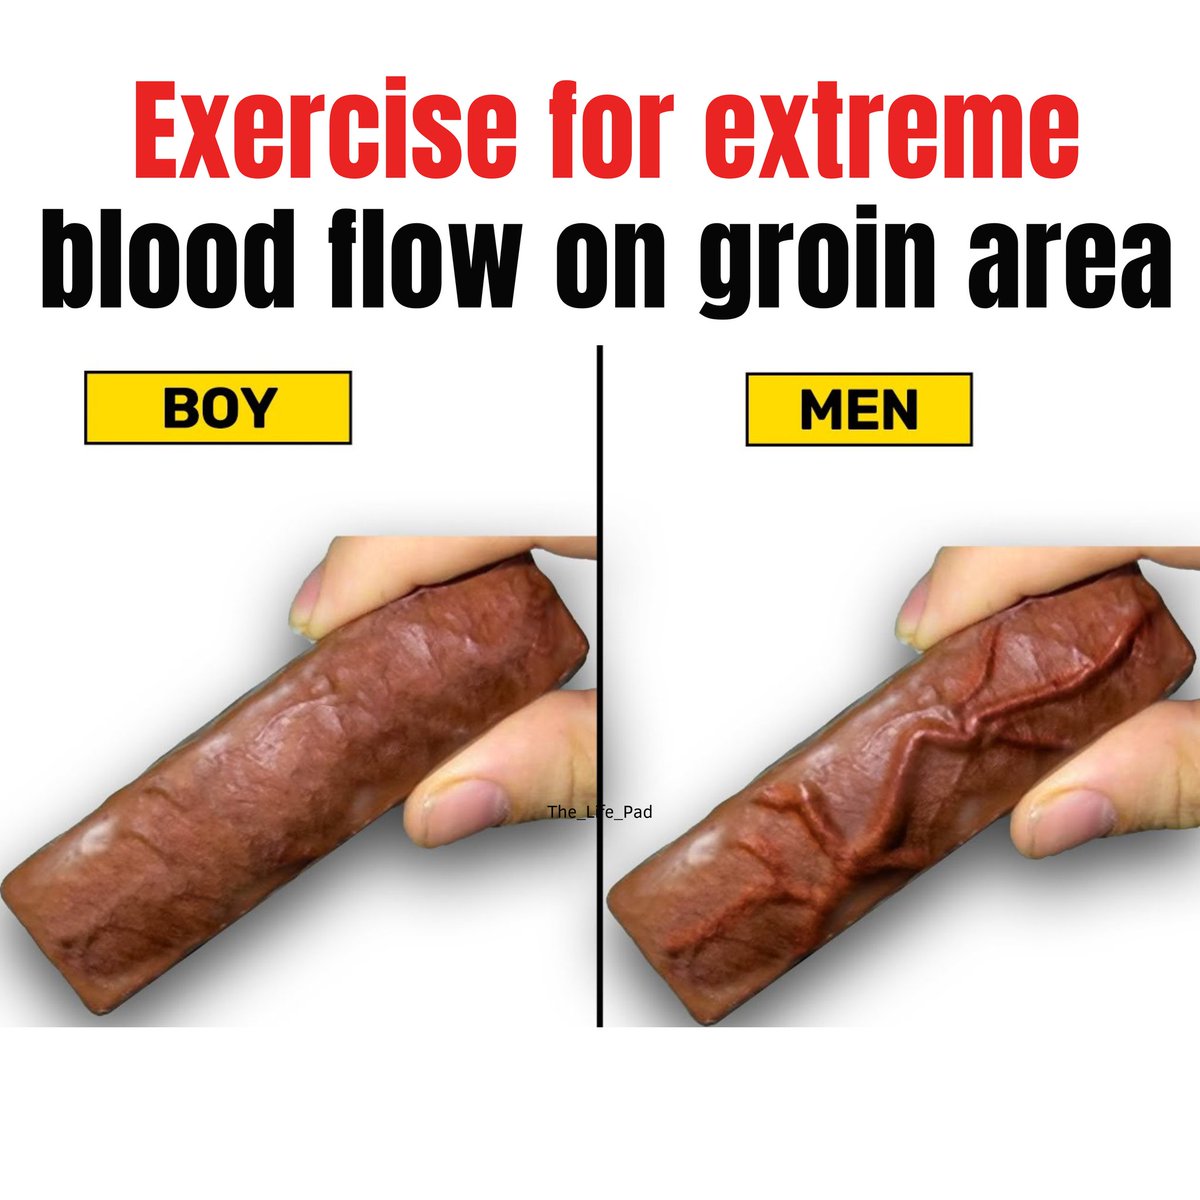 Get monster veins, 6 exercise for extreme blood flow on groin area & lower abs 🍆 (Do this and satisfy your woman)